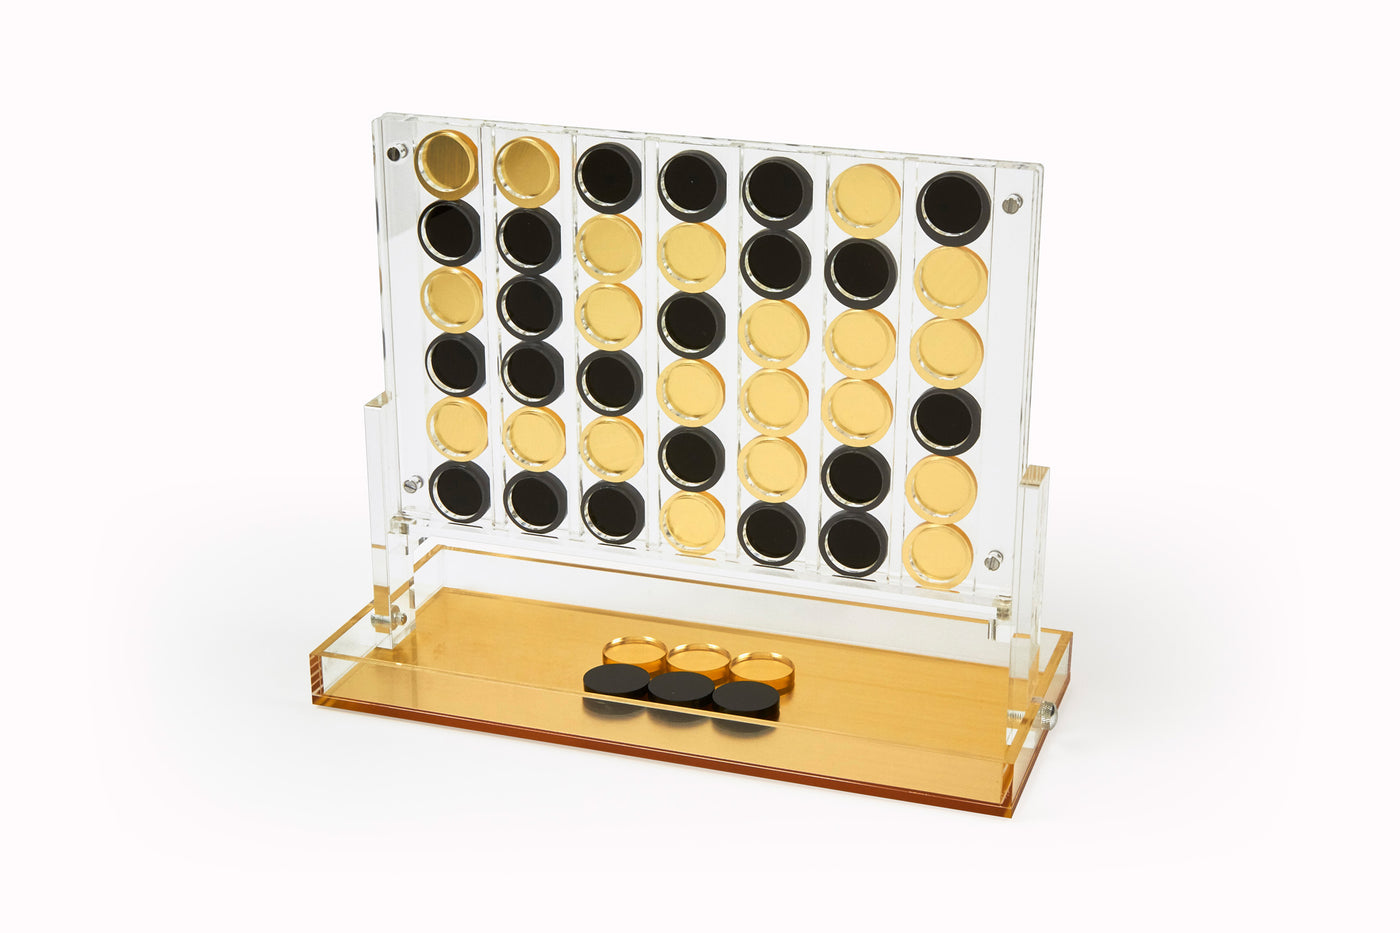 GAME CONNECT 4 LUCITE GOLD